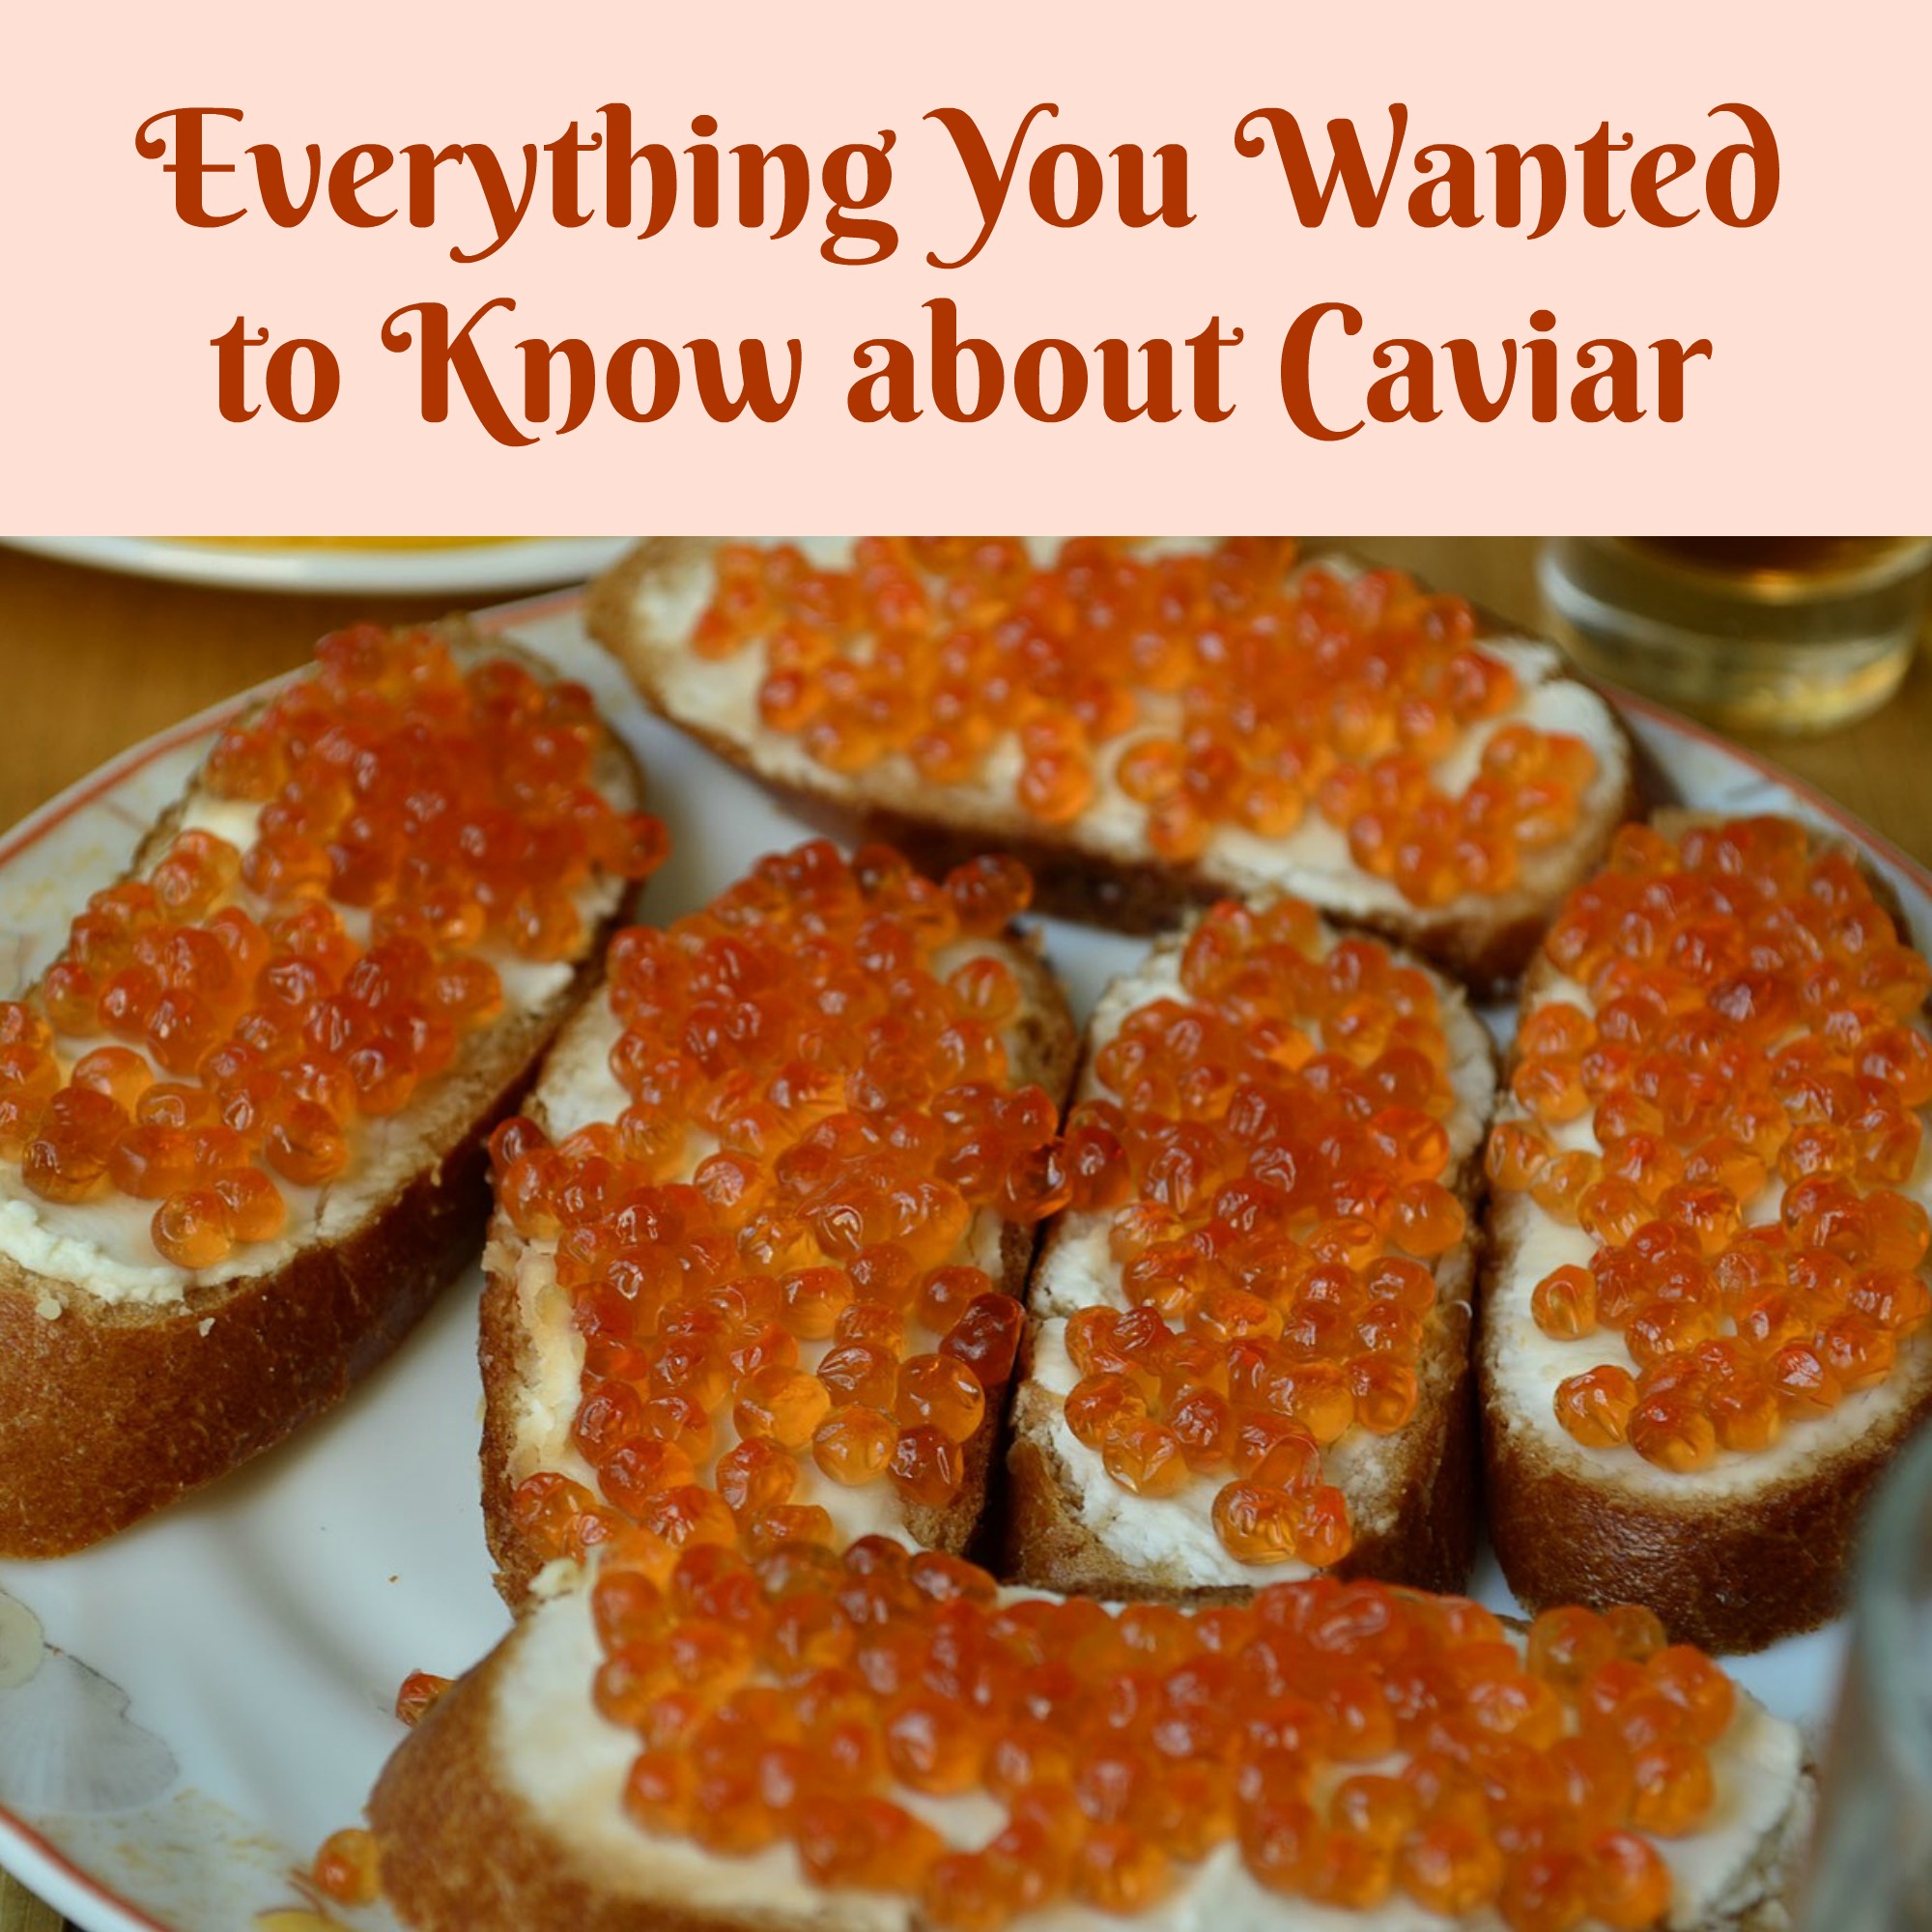 Everything You Wanted to Know about Caviar